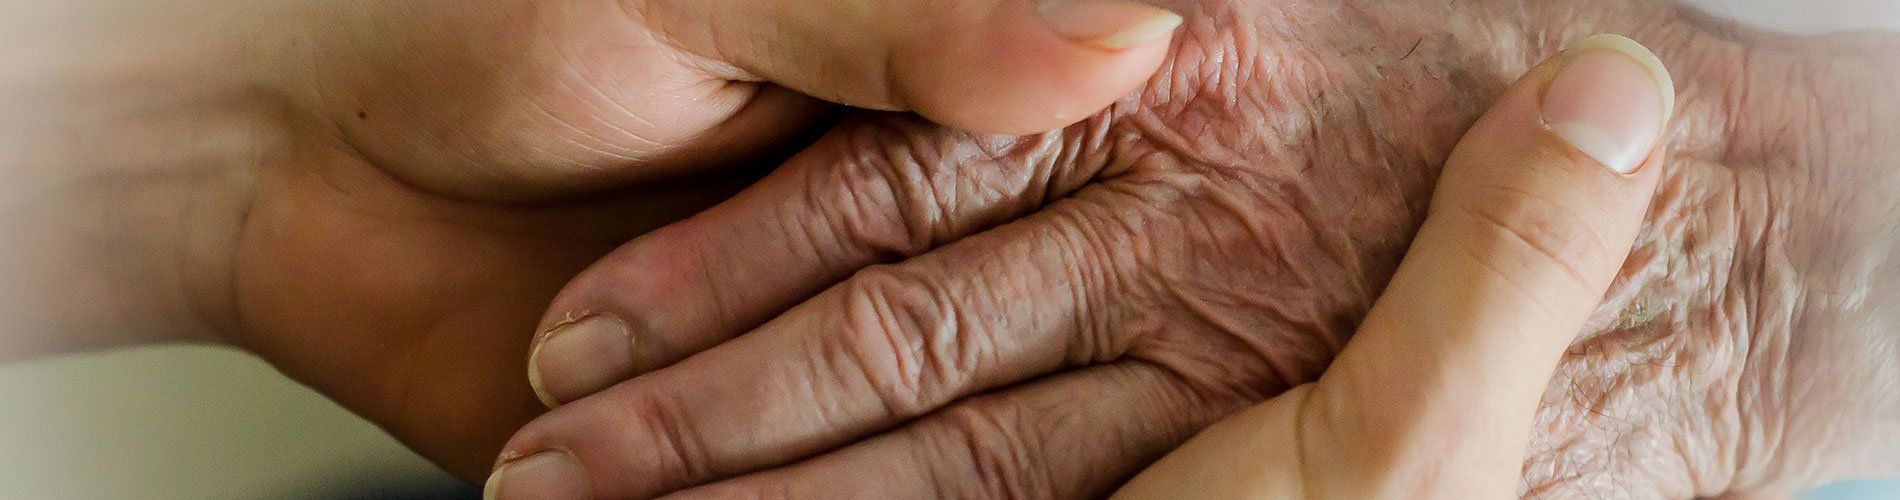 Elderly Suicide Rates Are on the Rise